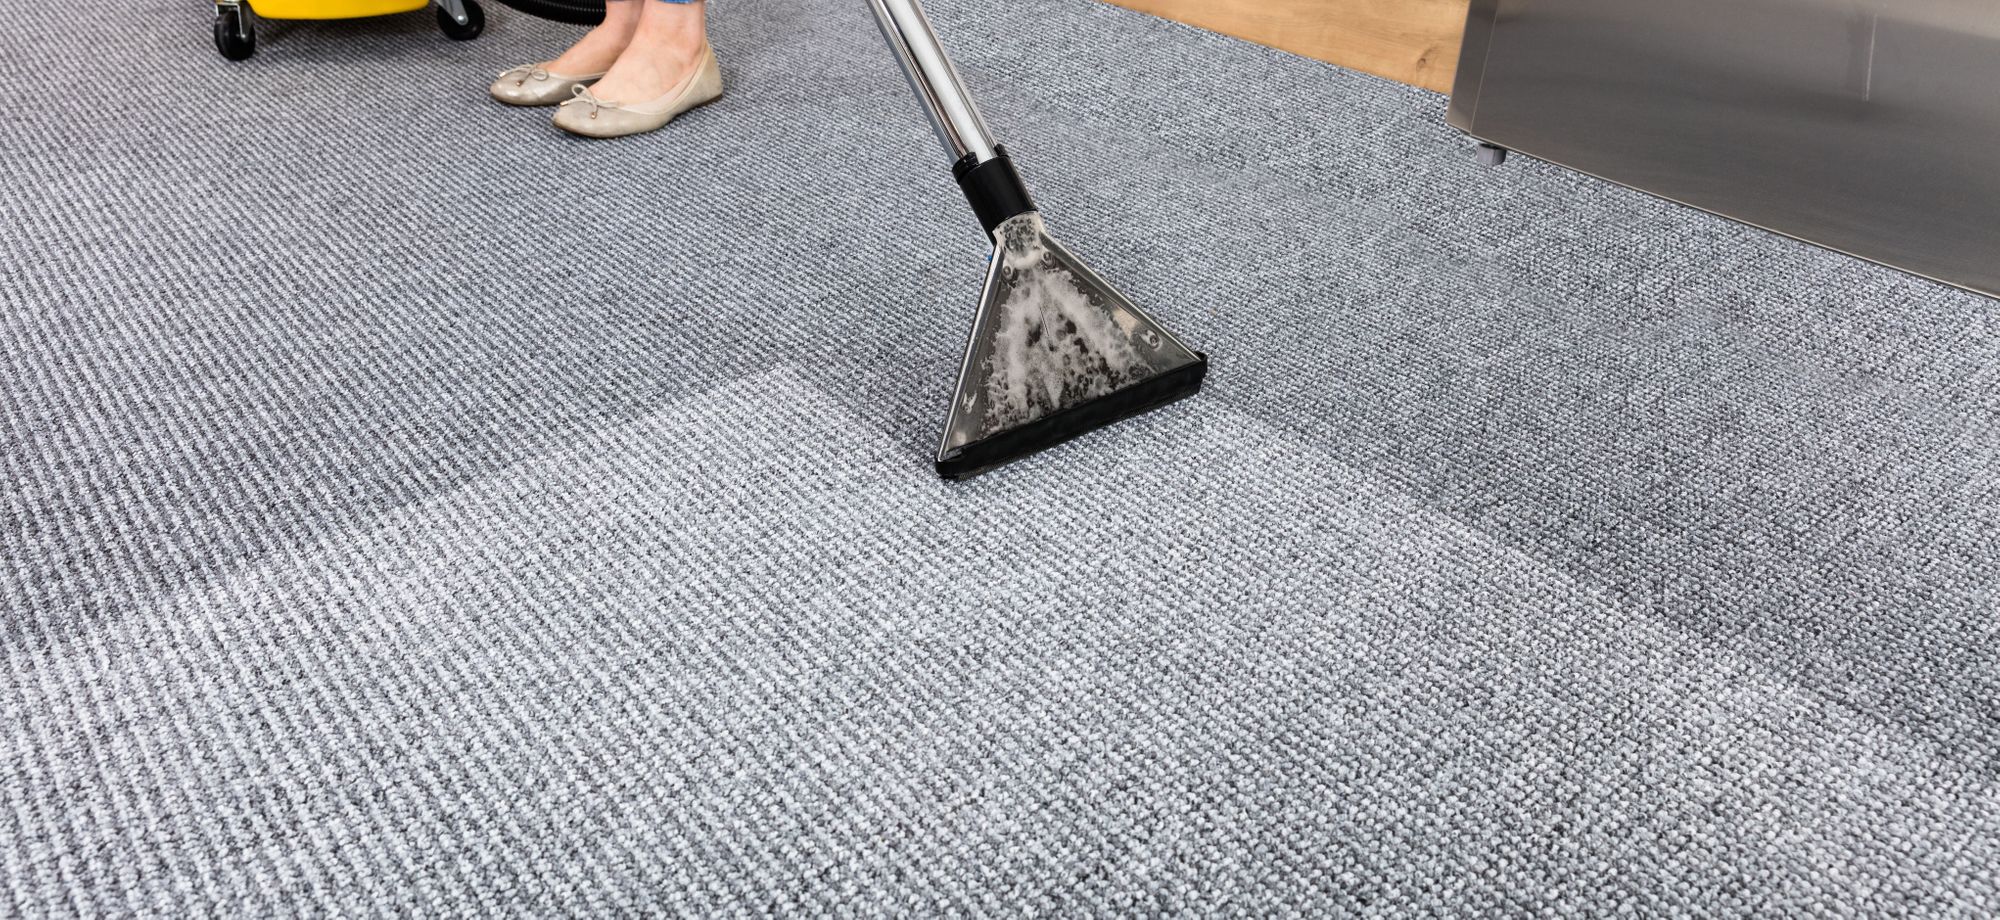 Know How Regular Carpet Cleaning Benefits